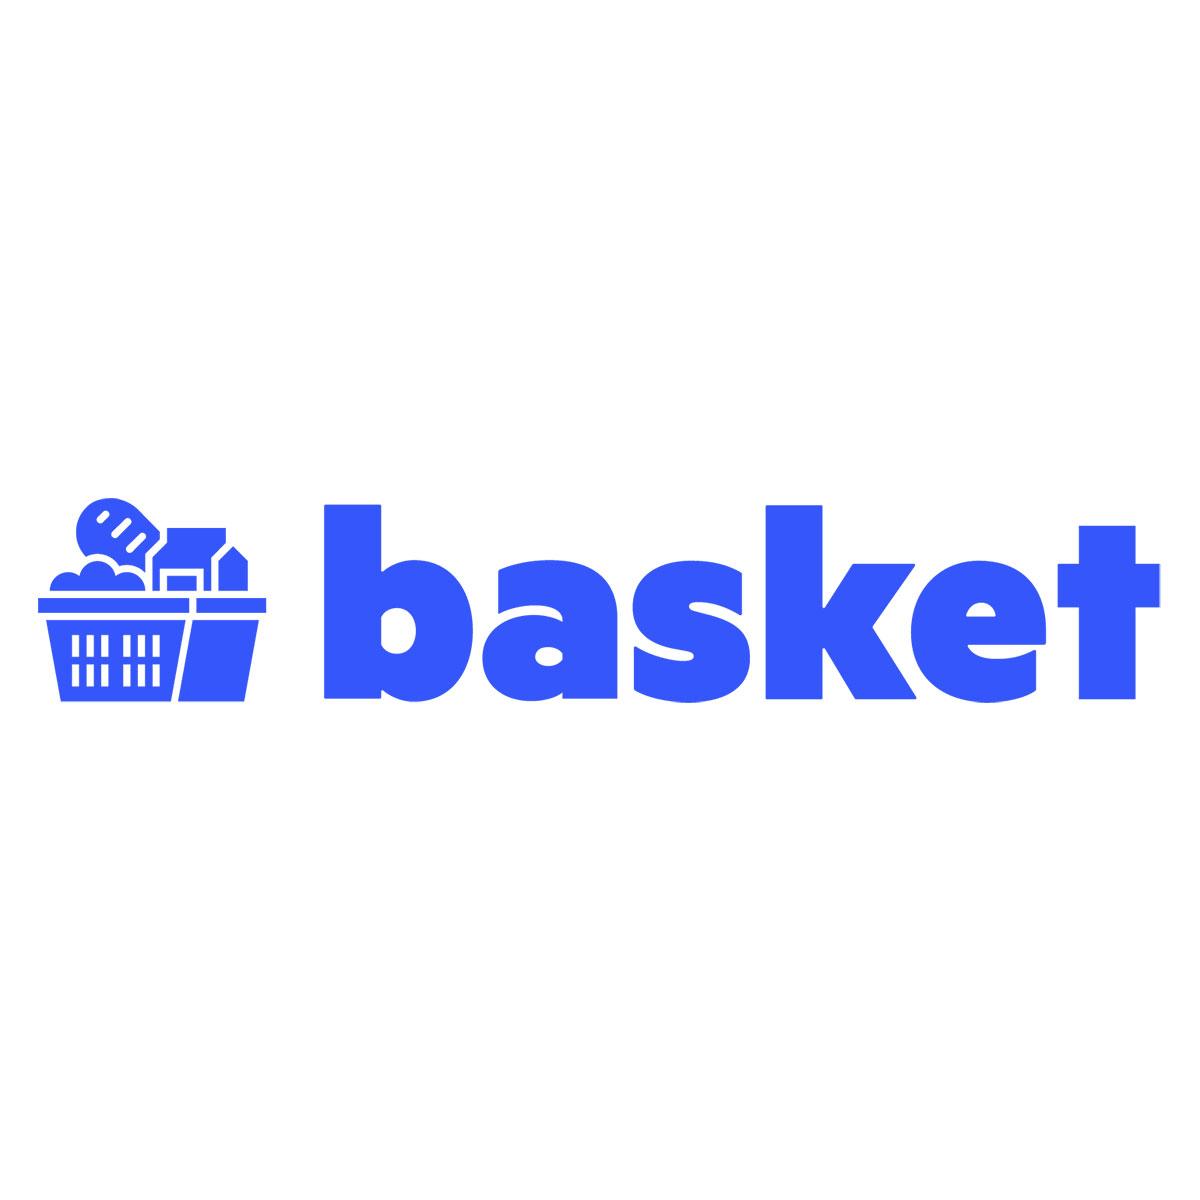 Basket Logo - Basket | Smart Grocery Shopping List App | Compare Grocery Prices